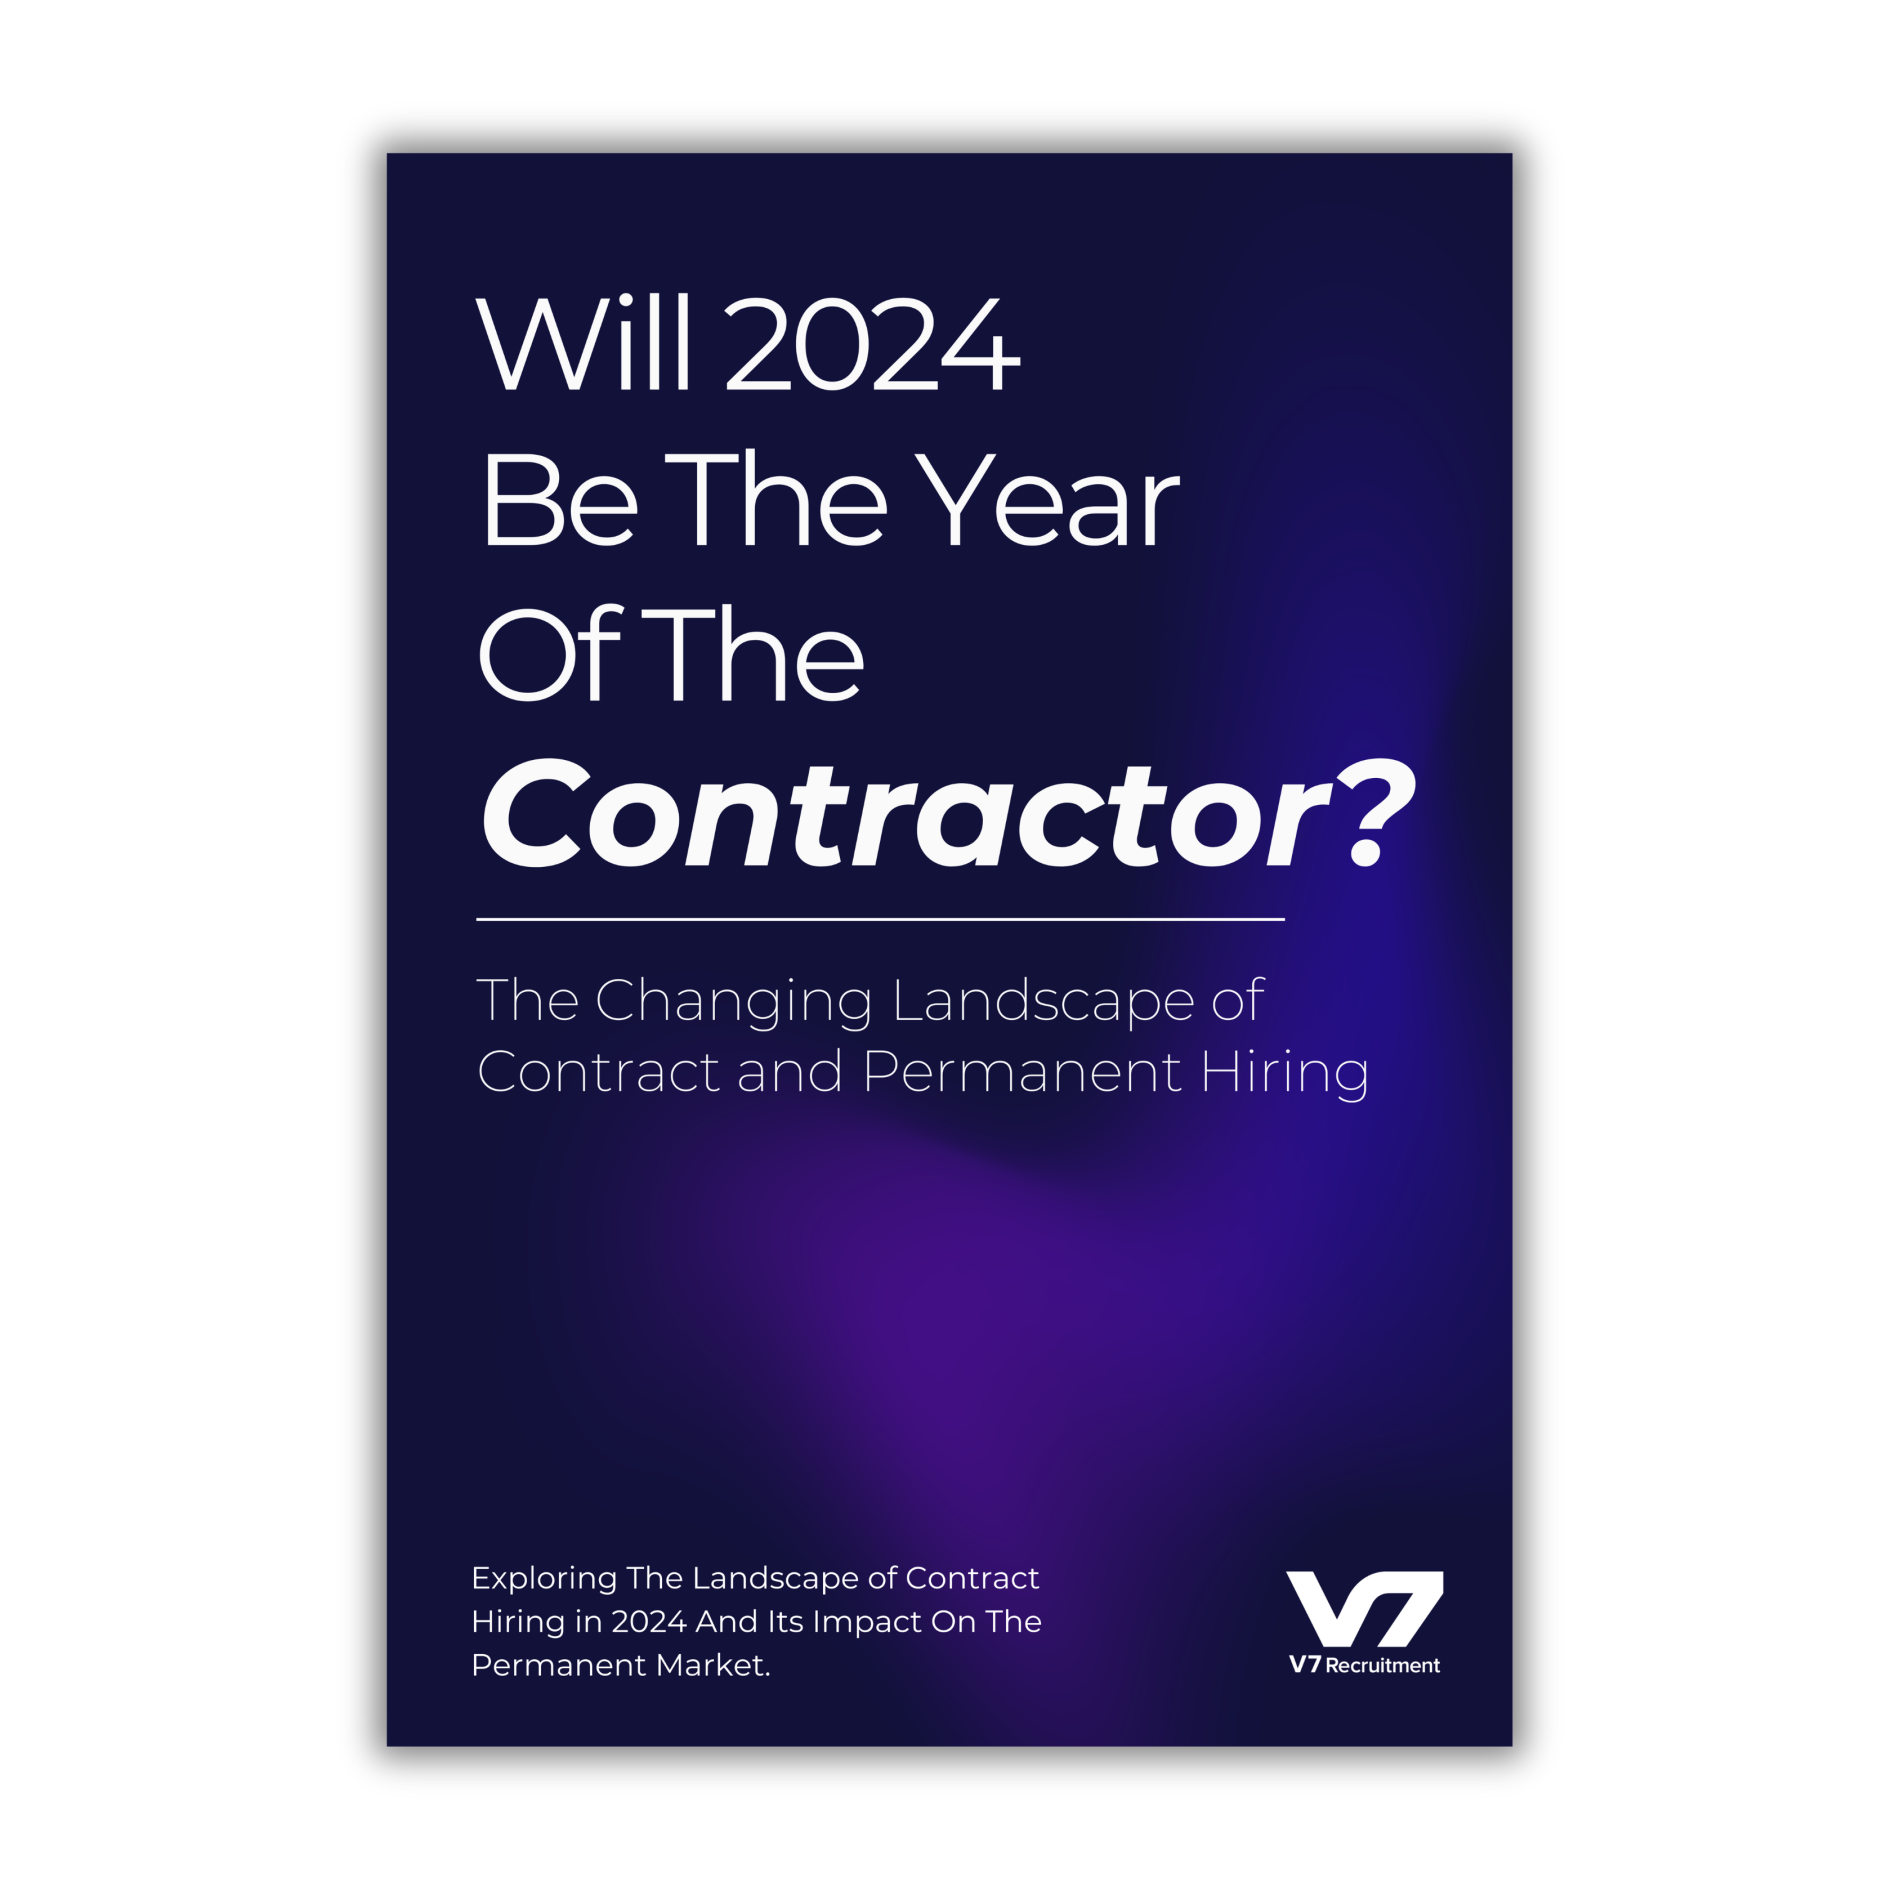 Resources - Will this be the year of the contractor